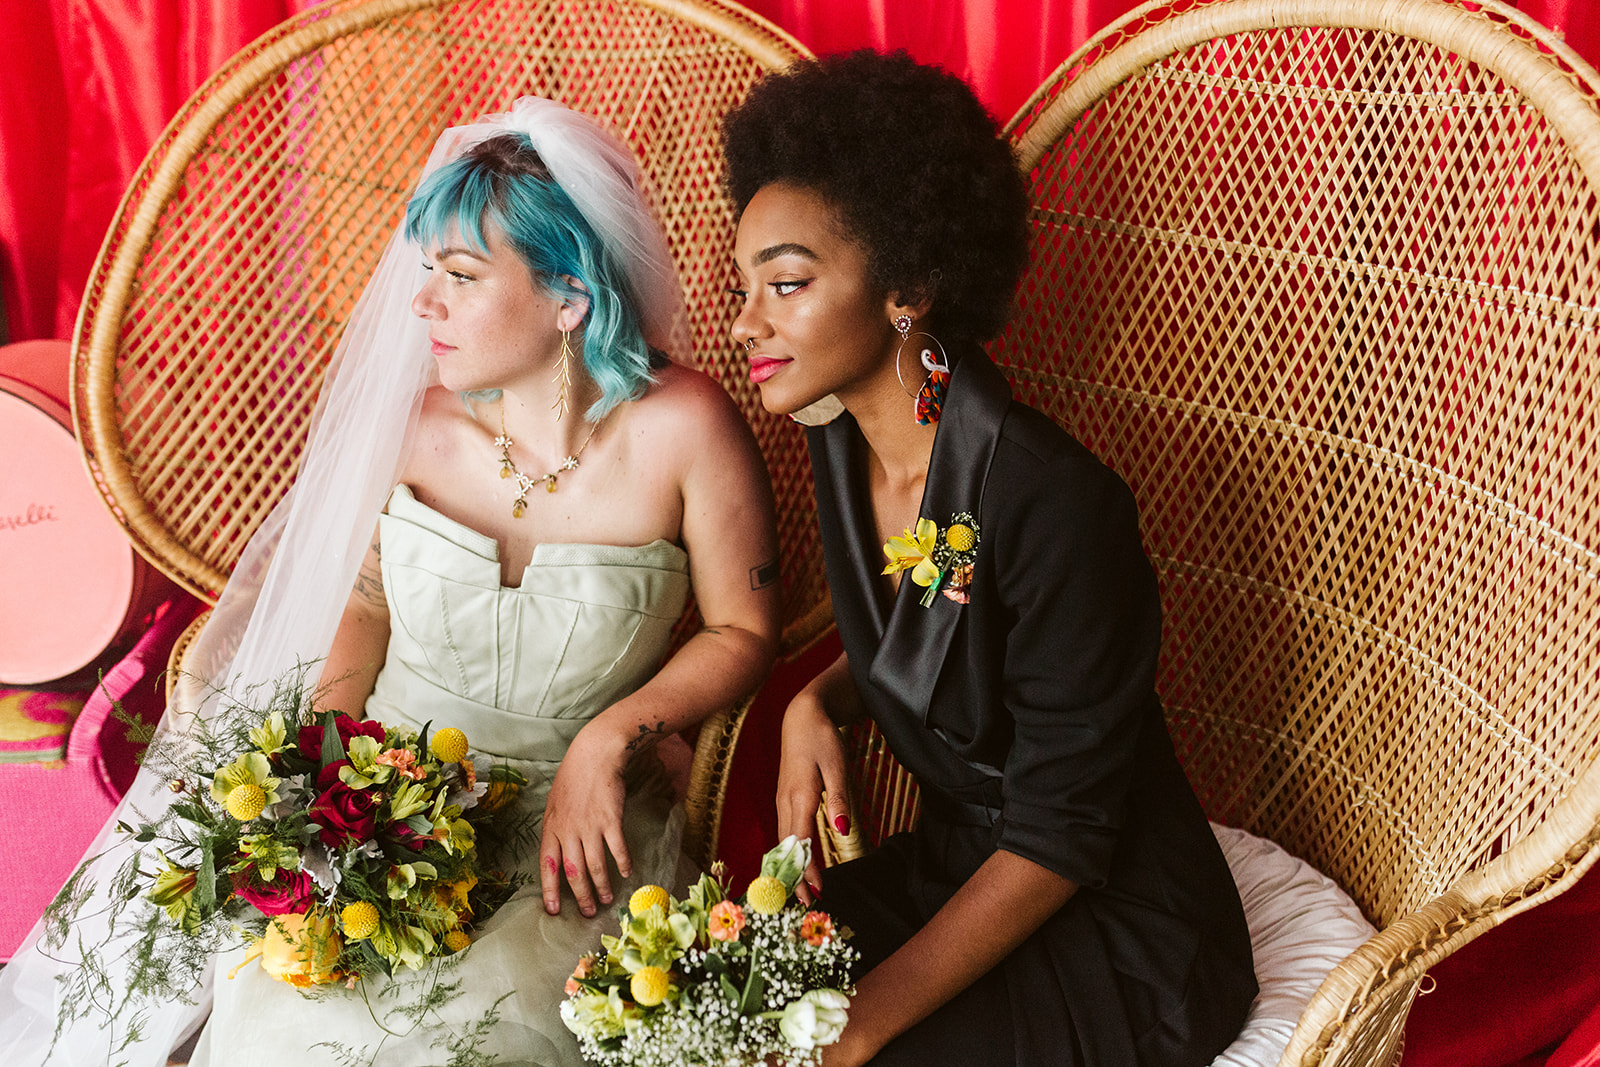 The brides sit with their bouquets in vintage rattan chairs at Moxy Chattanooga.